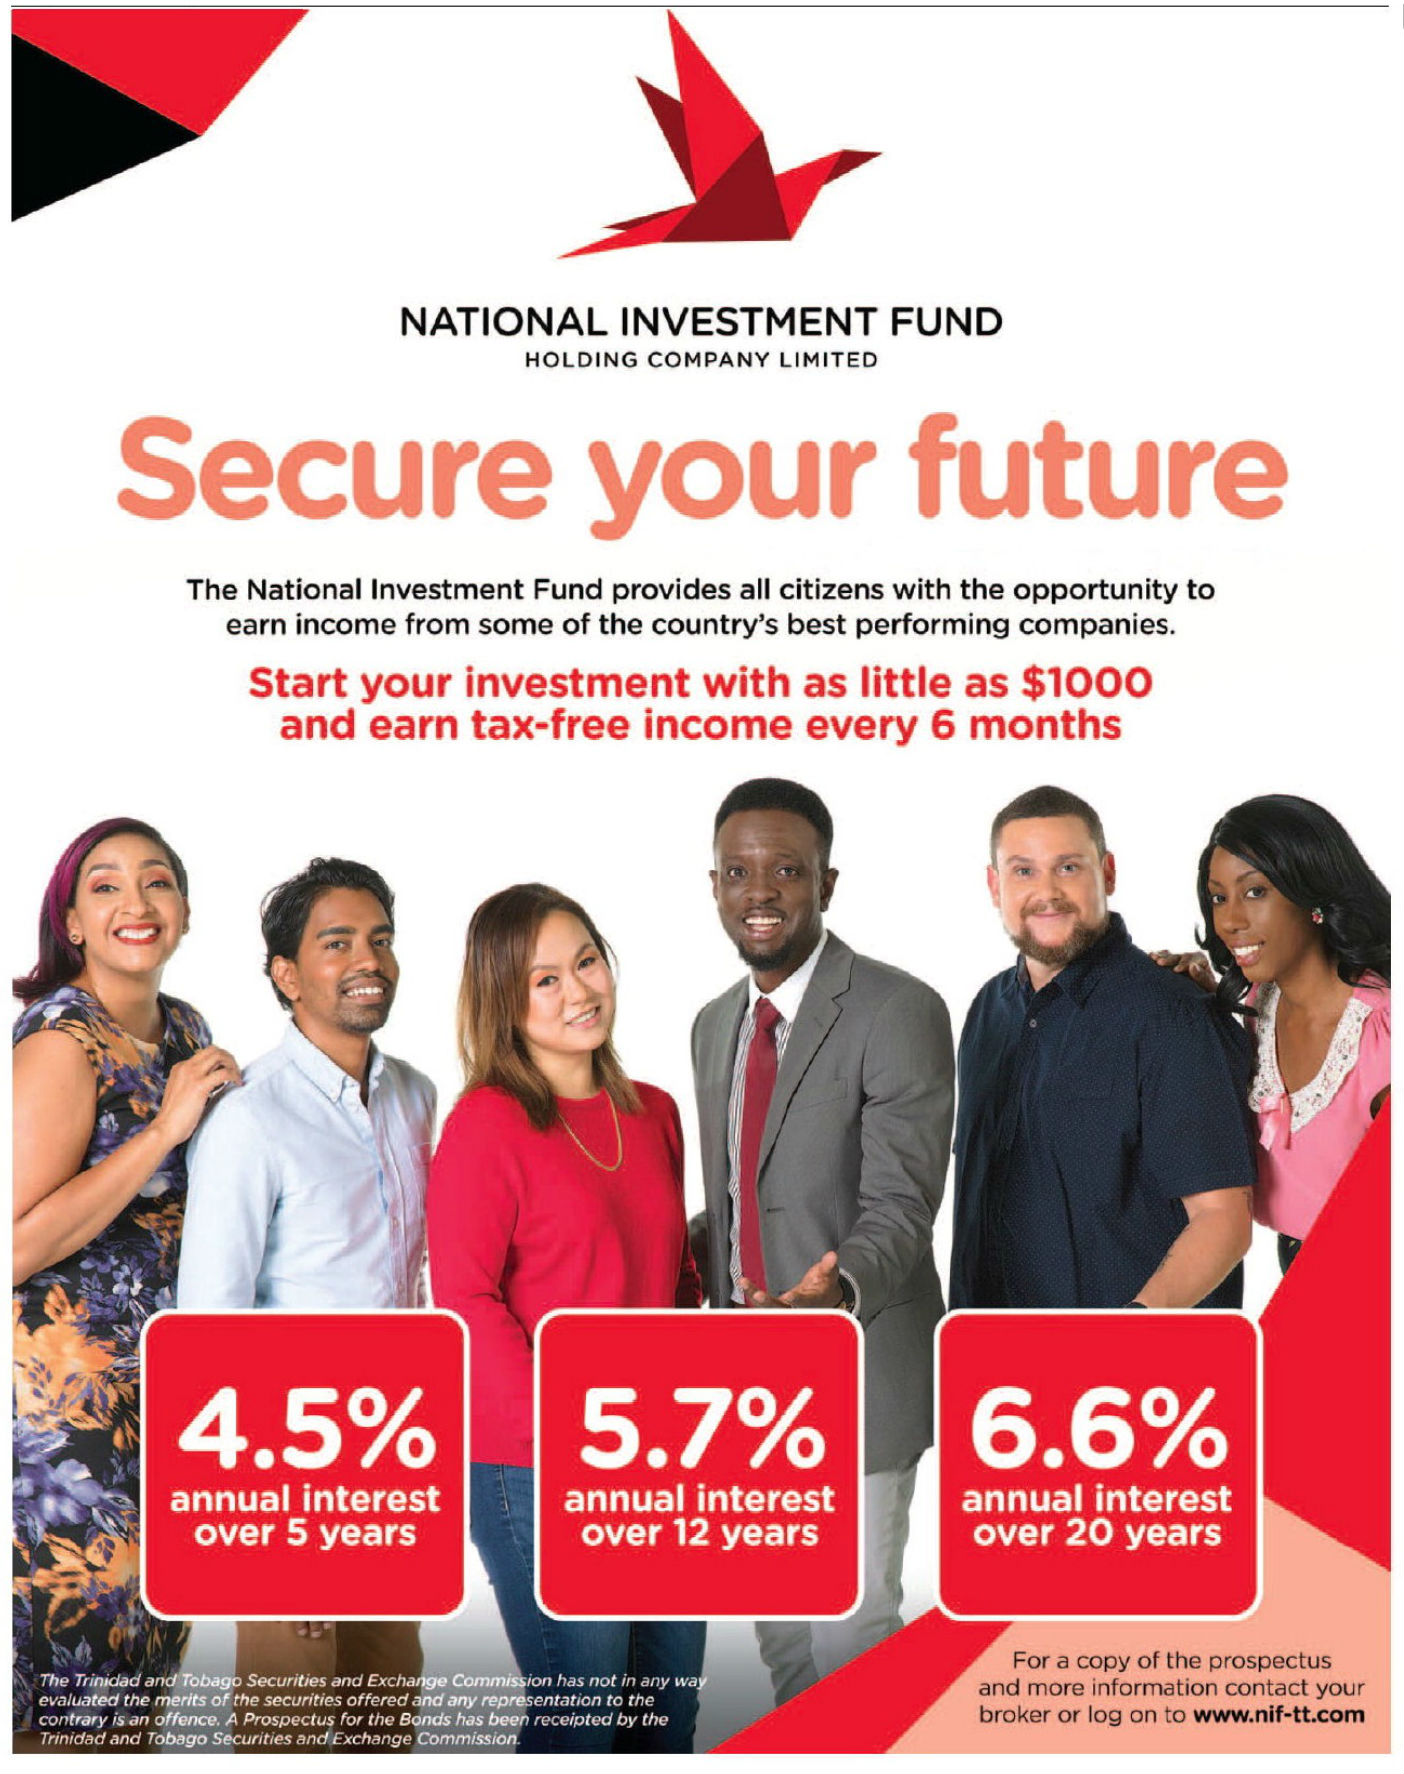 National Investment Fund Holding Company Limited (NIFTT